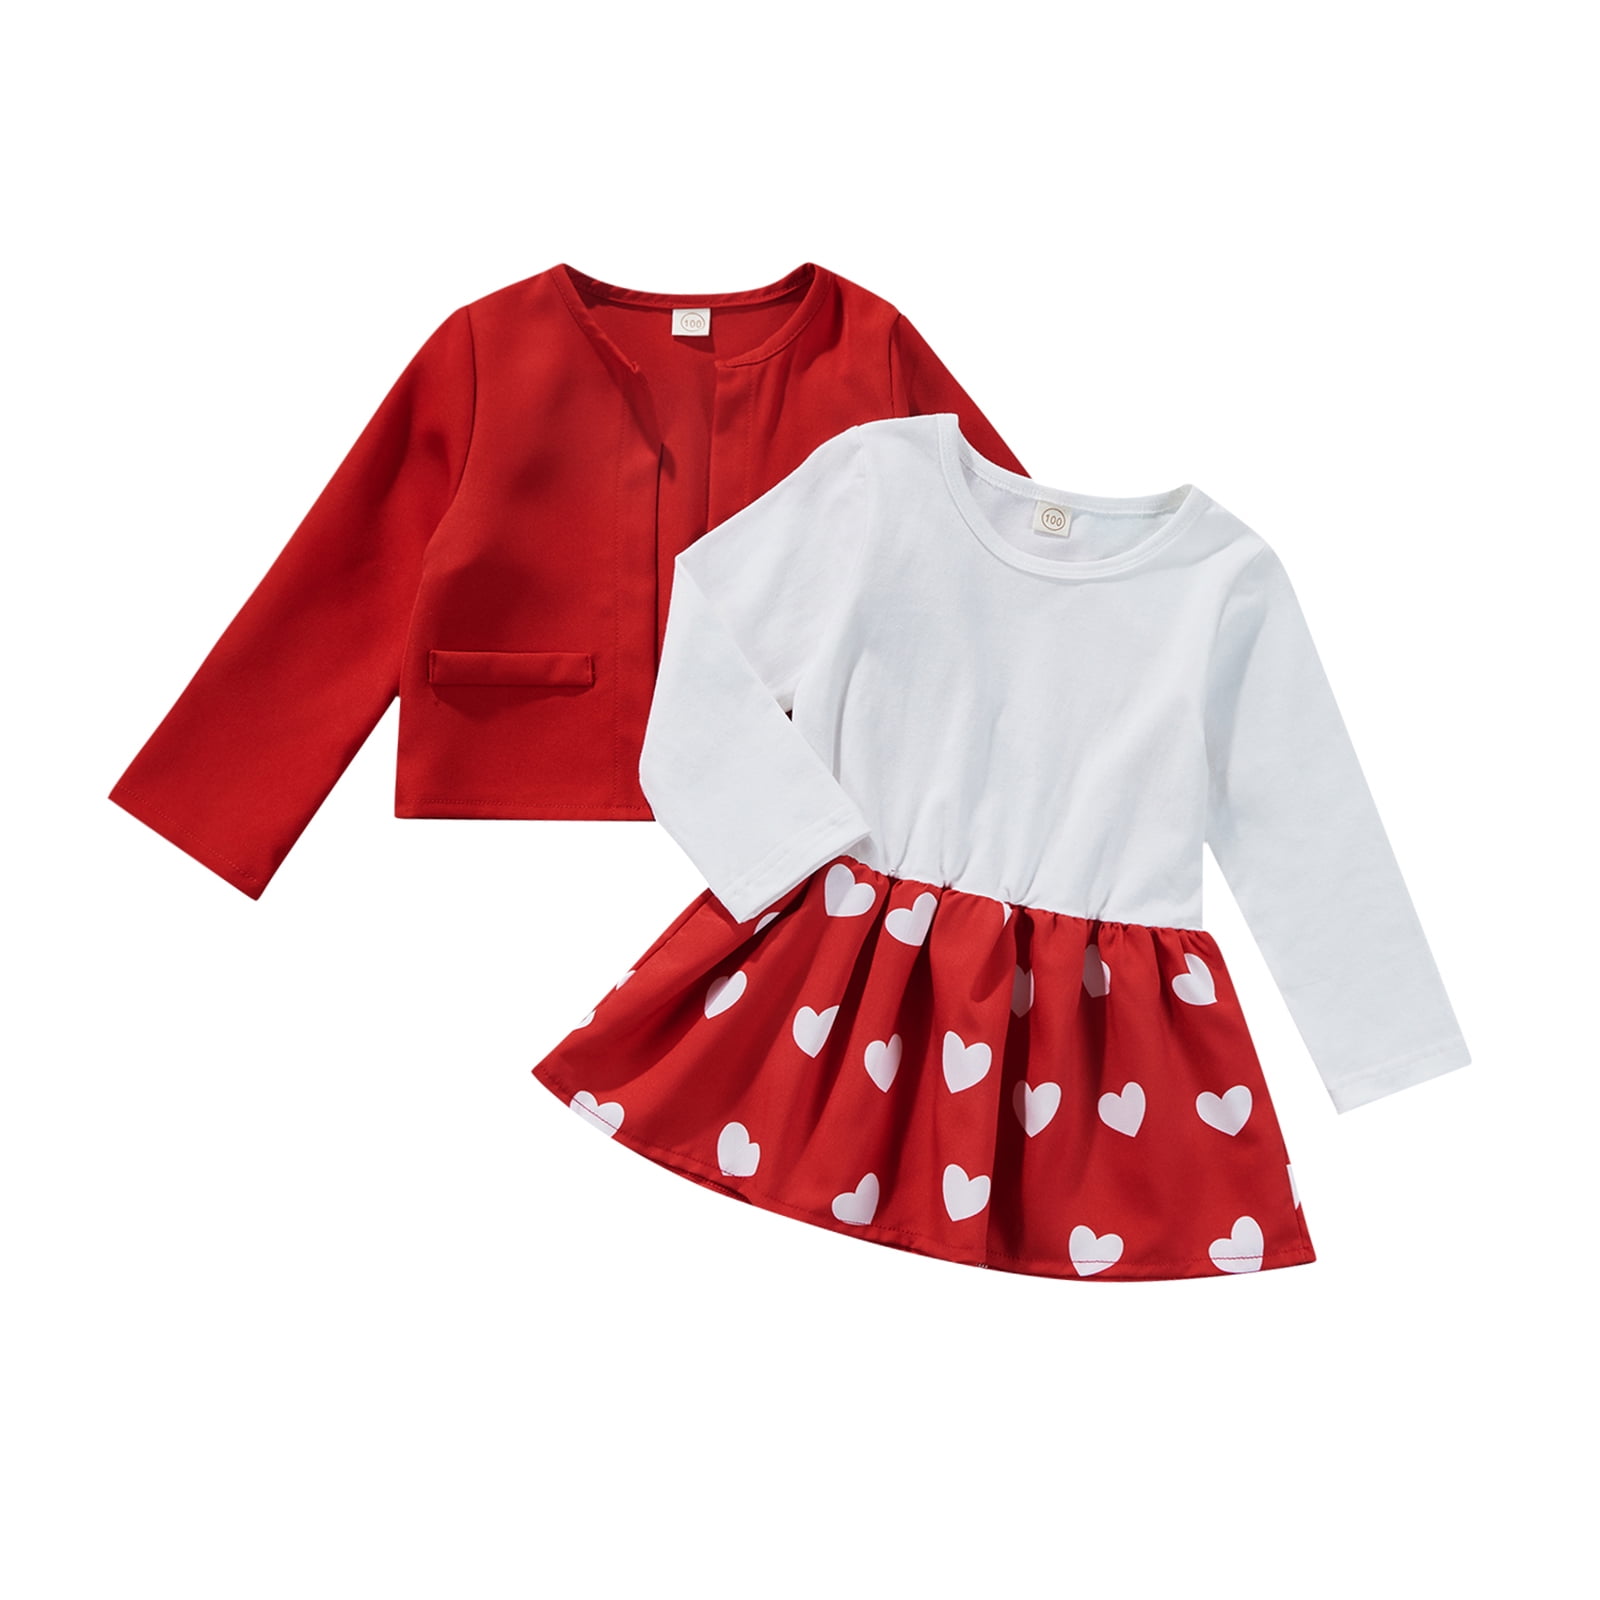 SIZE 4 Details about   GIRLS REINDEER TULLE DRESS AND STRIPED LEGGINGS 2PC SET 